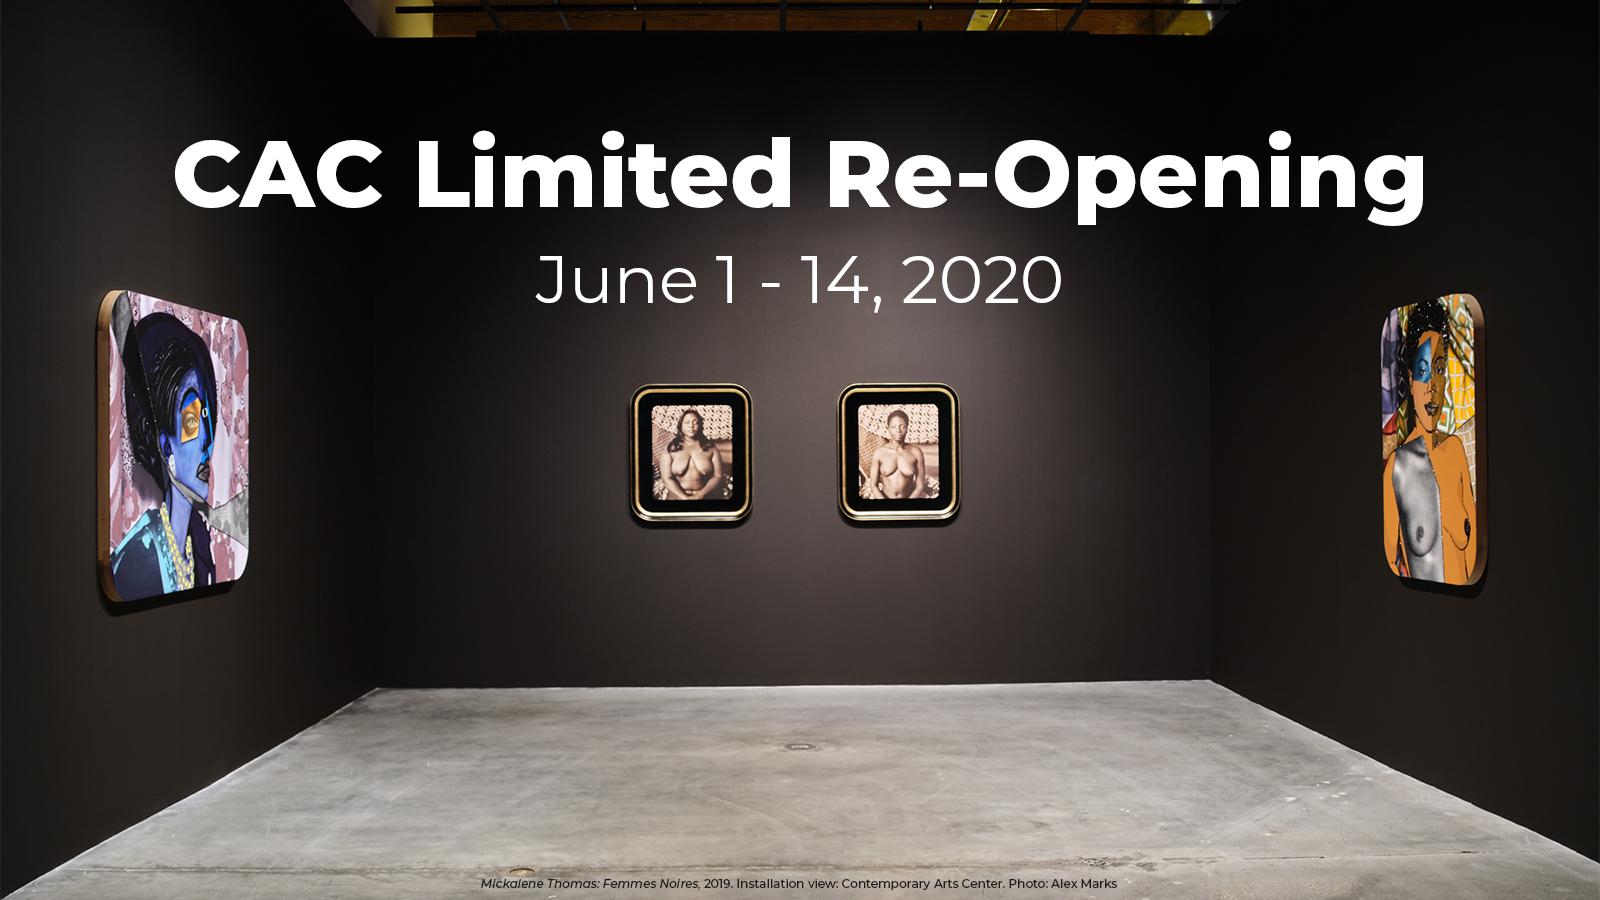 Reserve Complimentary Gallery Tickets for CAC Limited Re-Opening, June 1-14